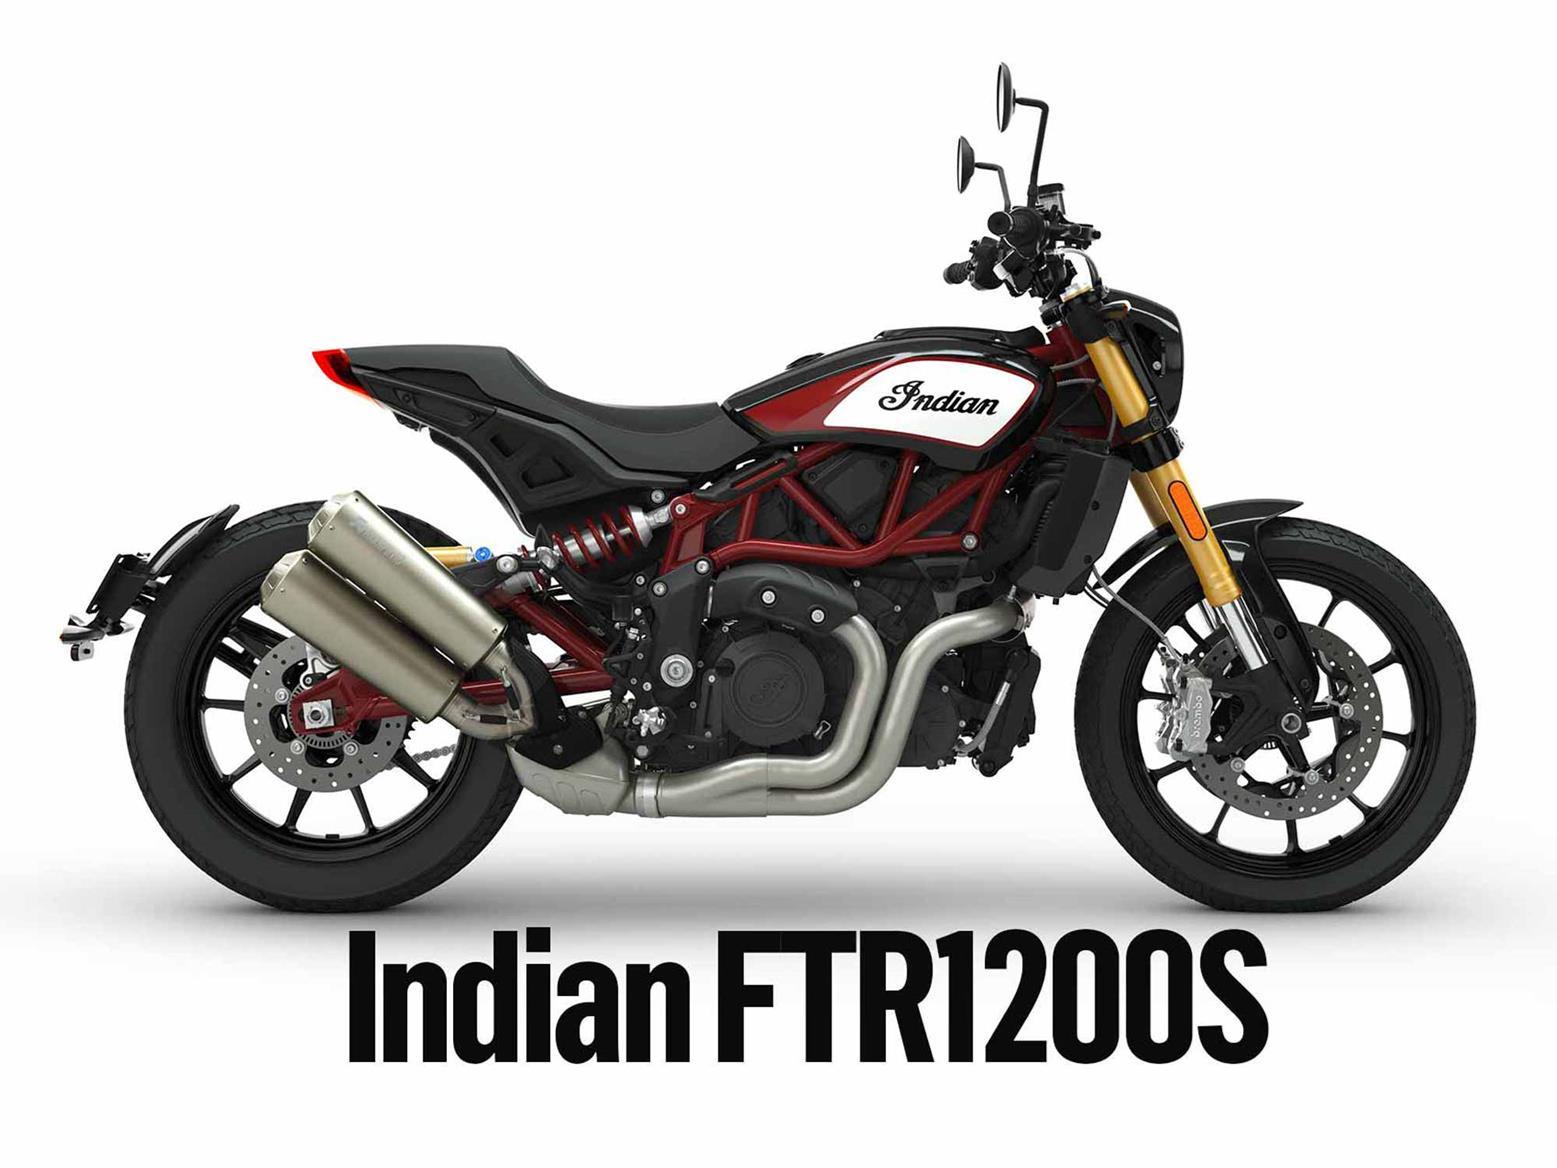 Read MCN's detailed Indian FTR1200 S long-term test review here